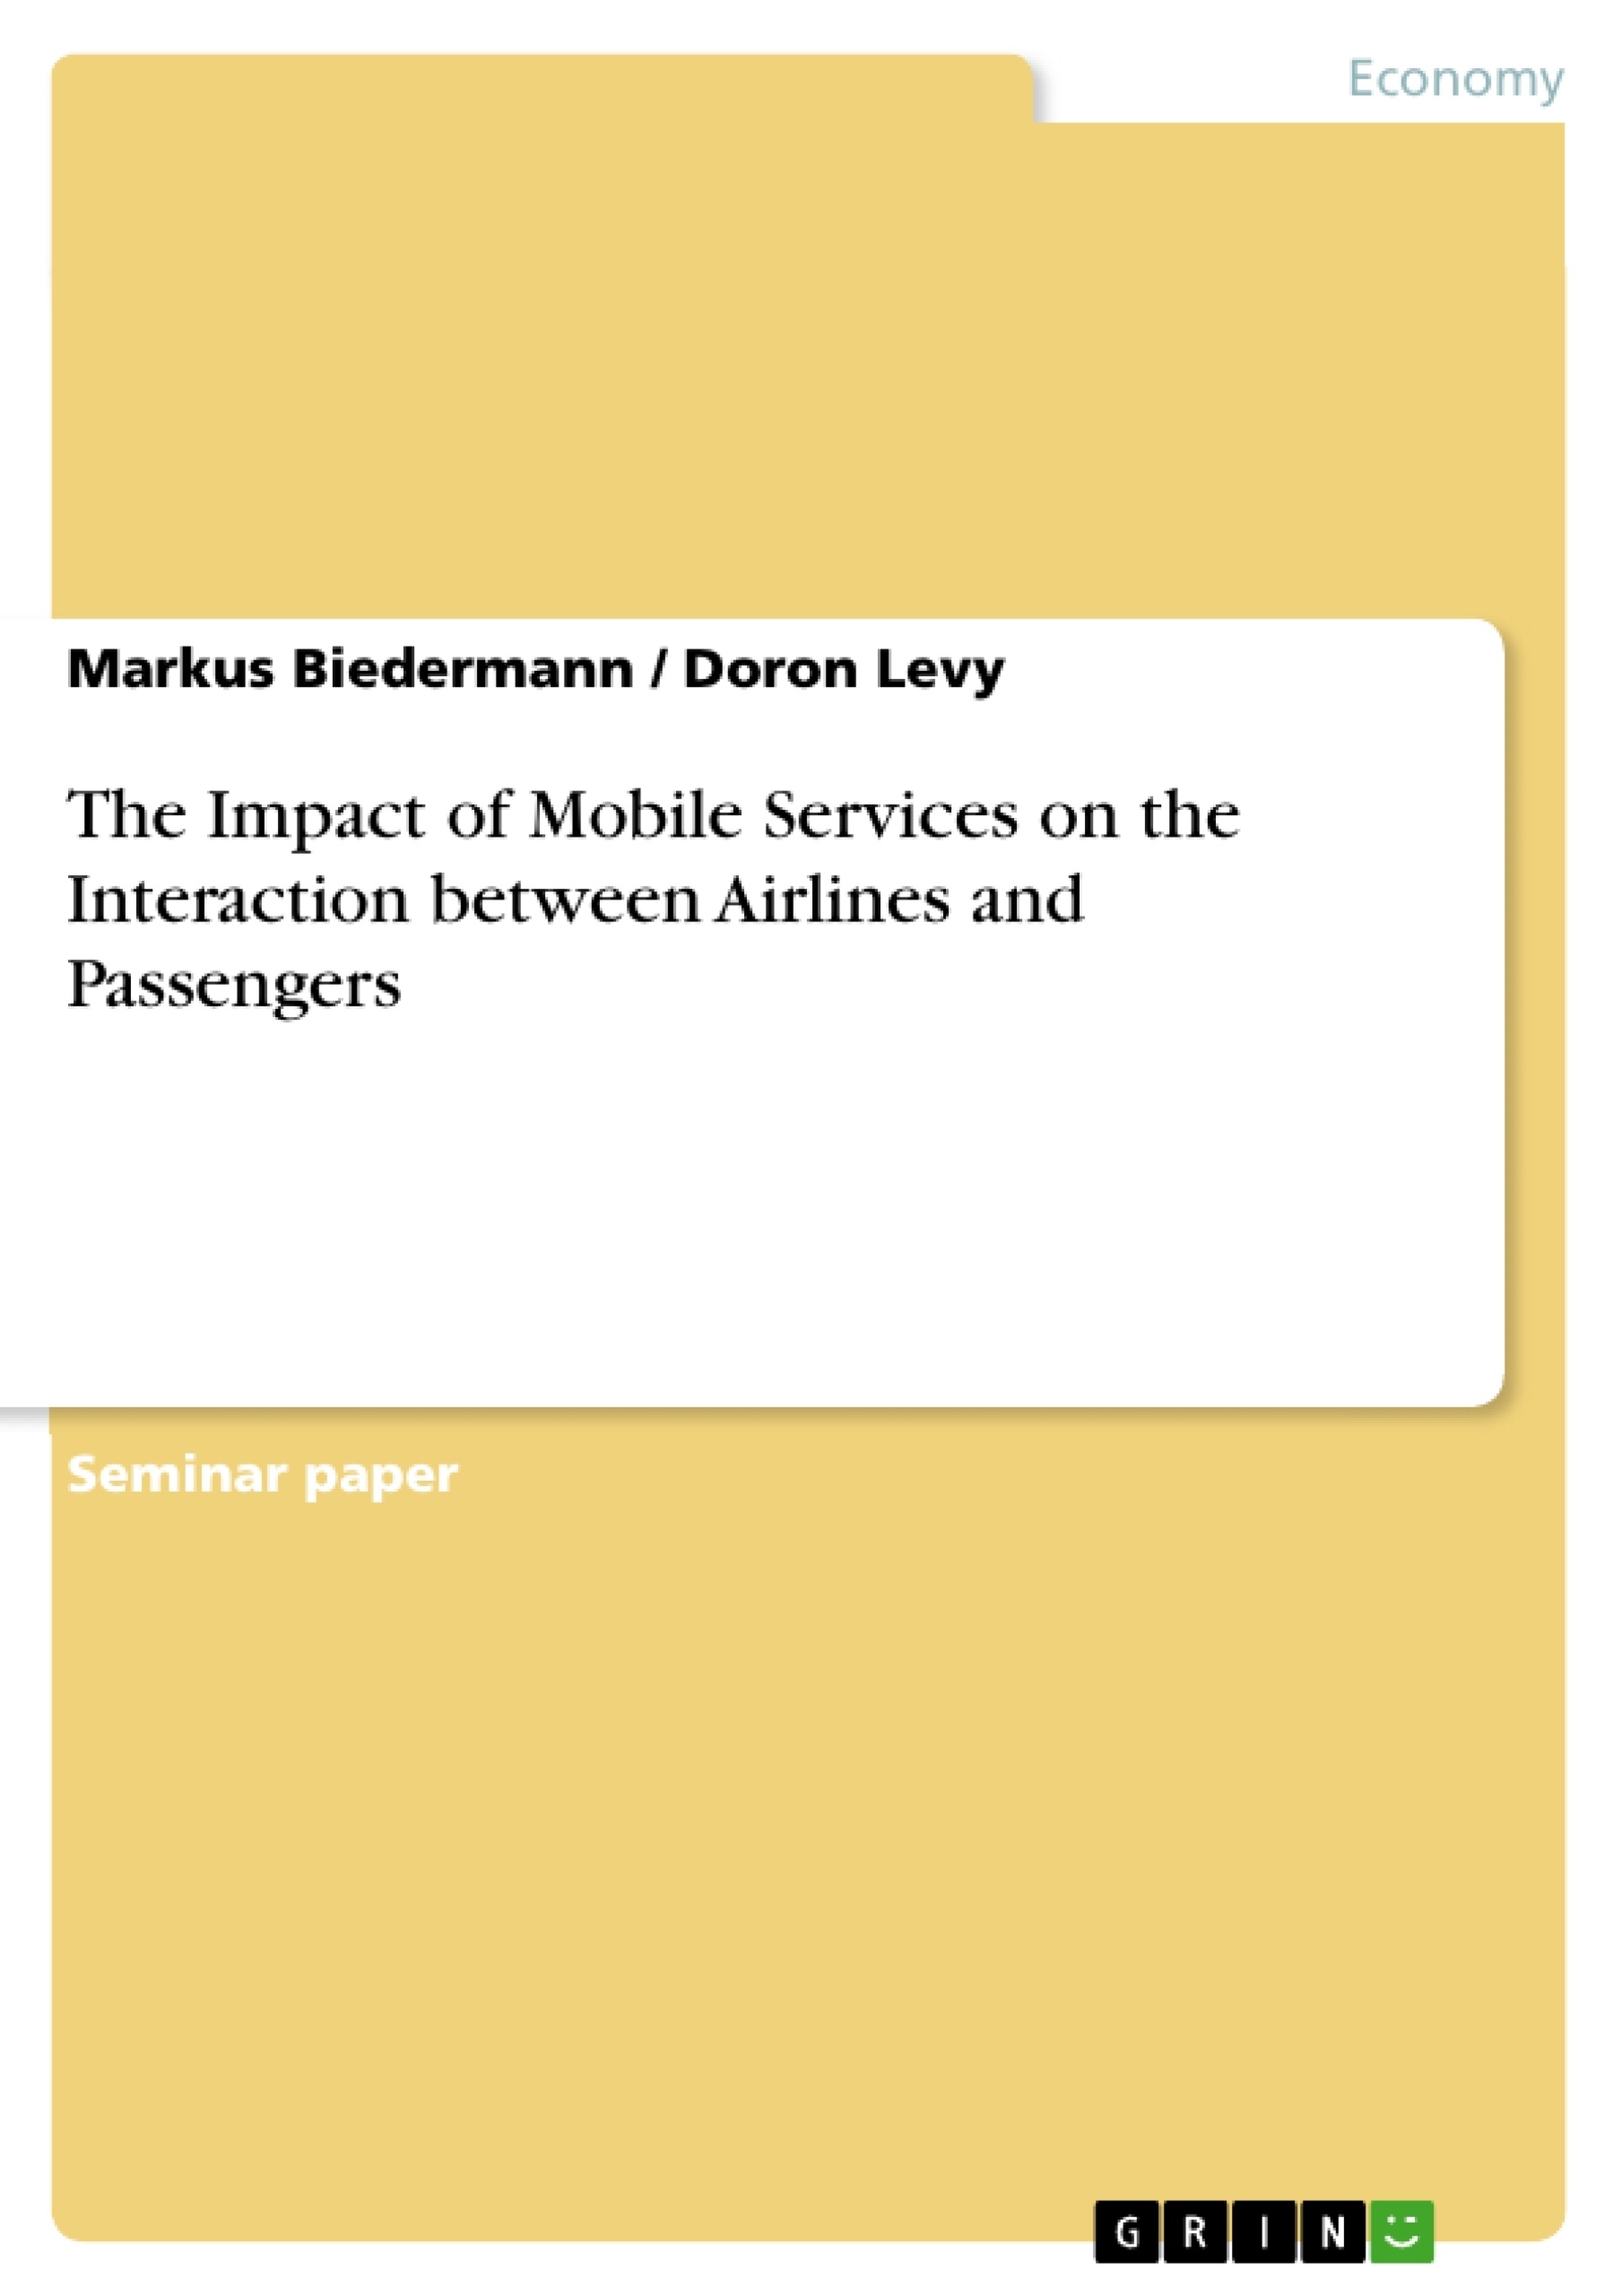 Title: The Impact of Mobile Services on the Interaction between Airlines and Passengers